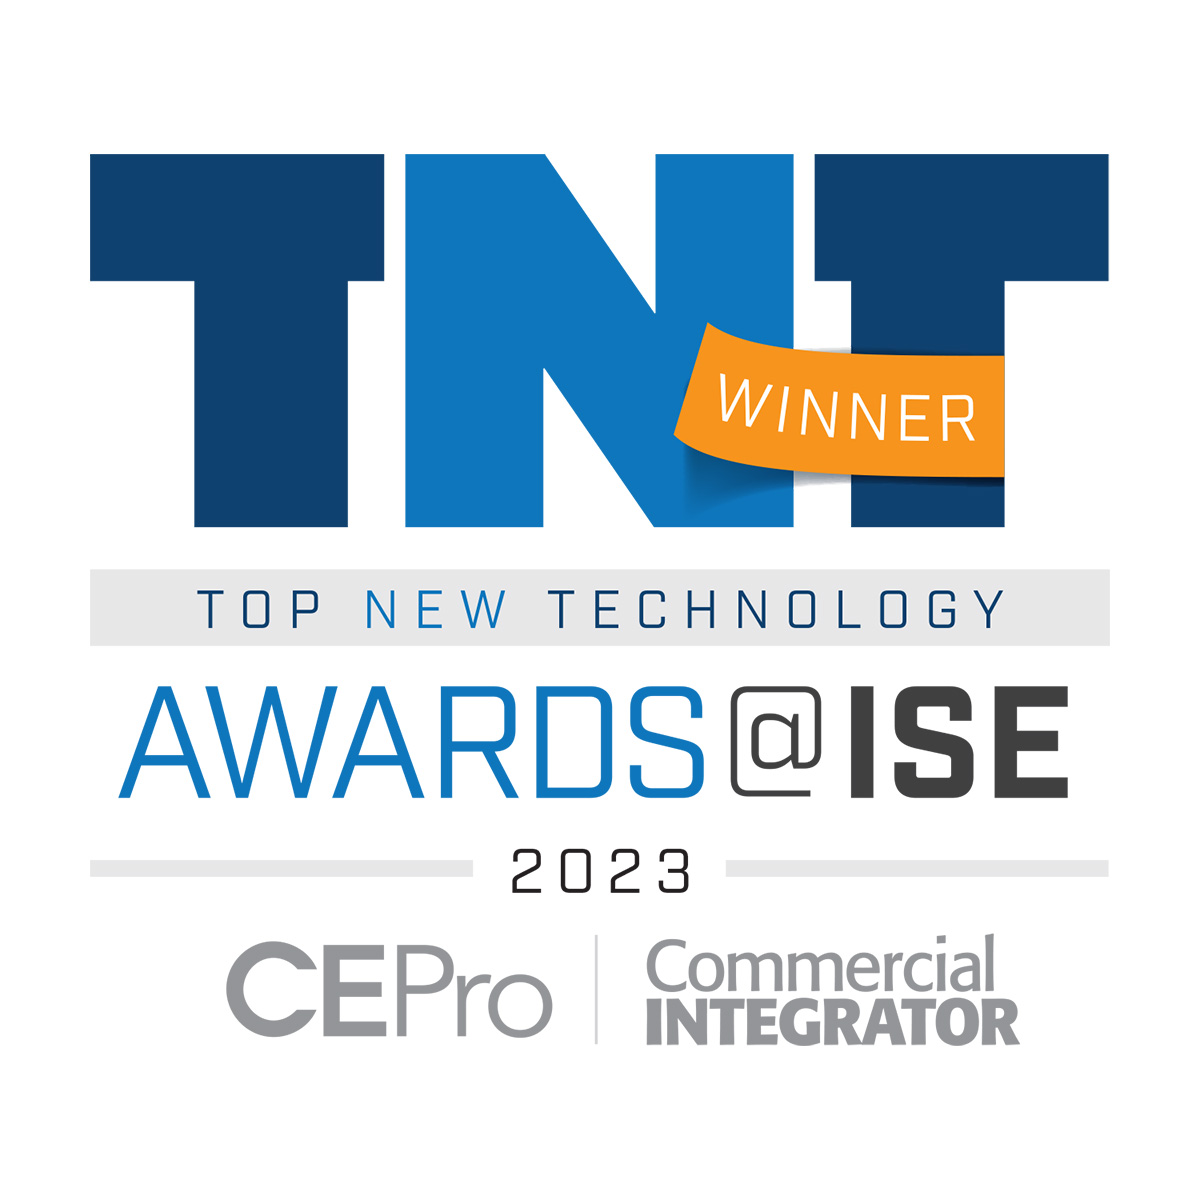 Commercial Integrator and CE Pro Top New Technology Awards